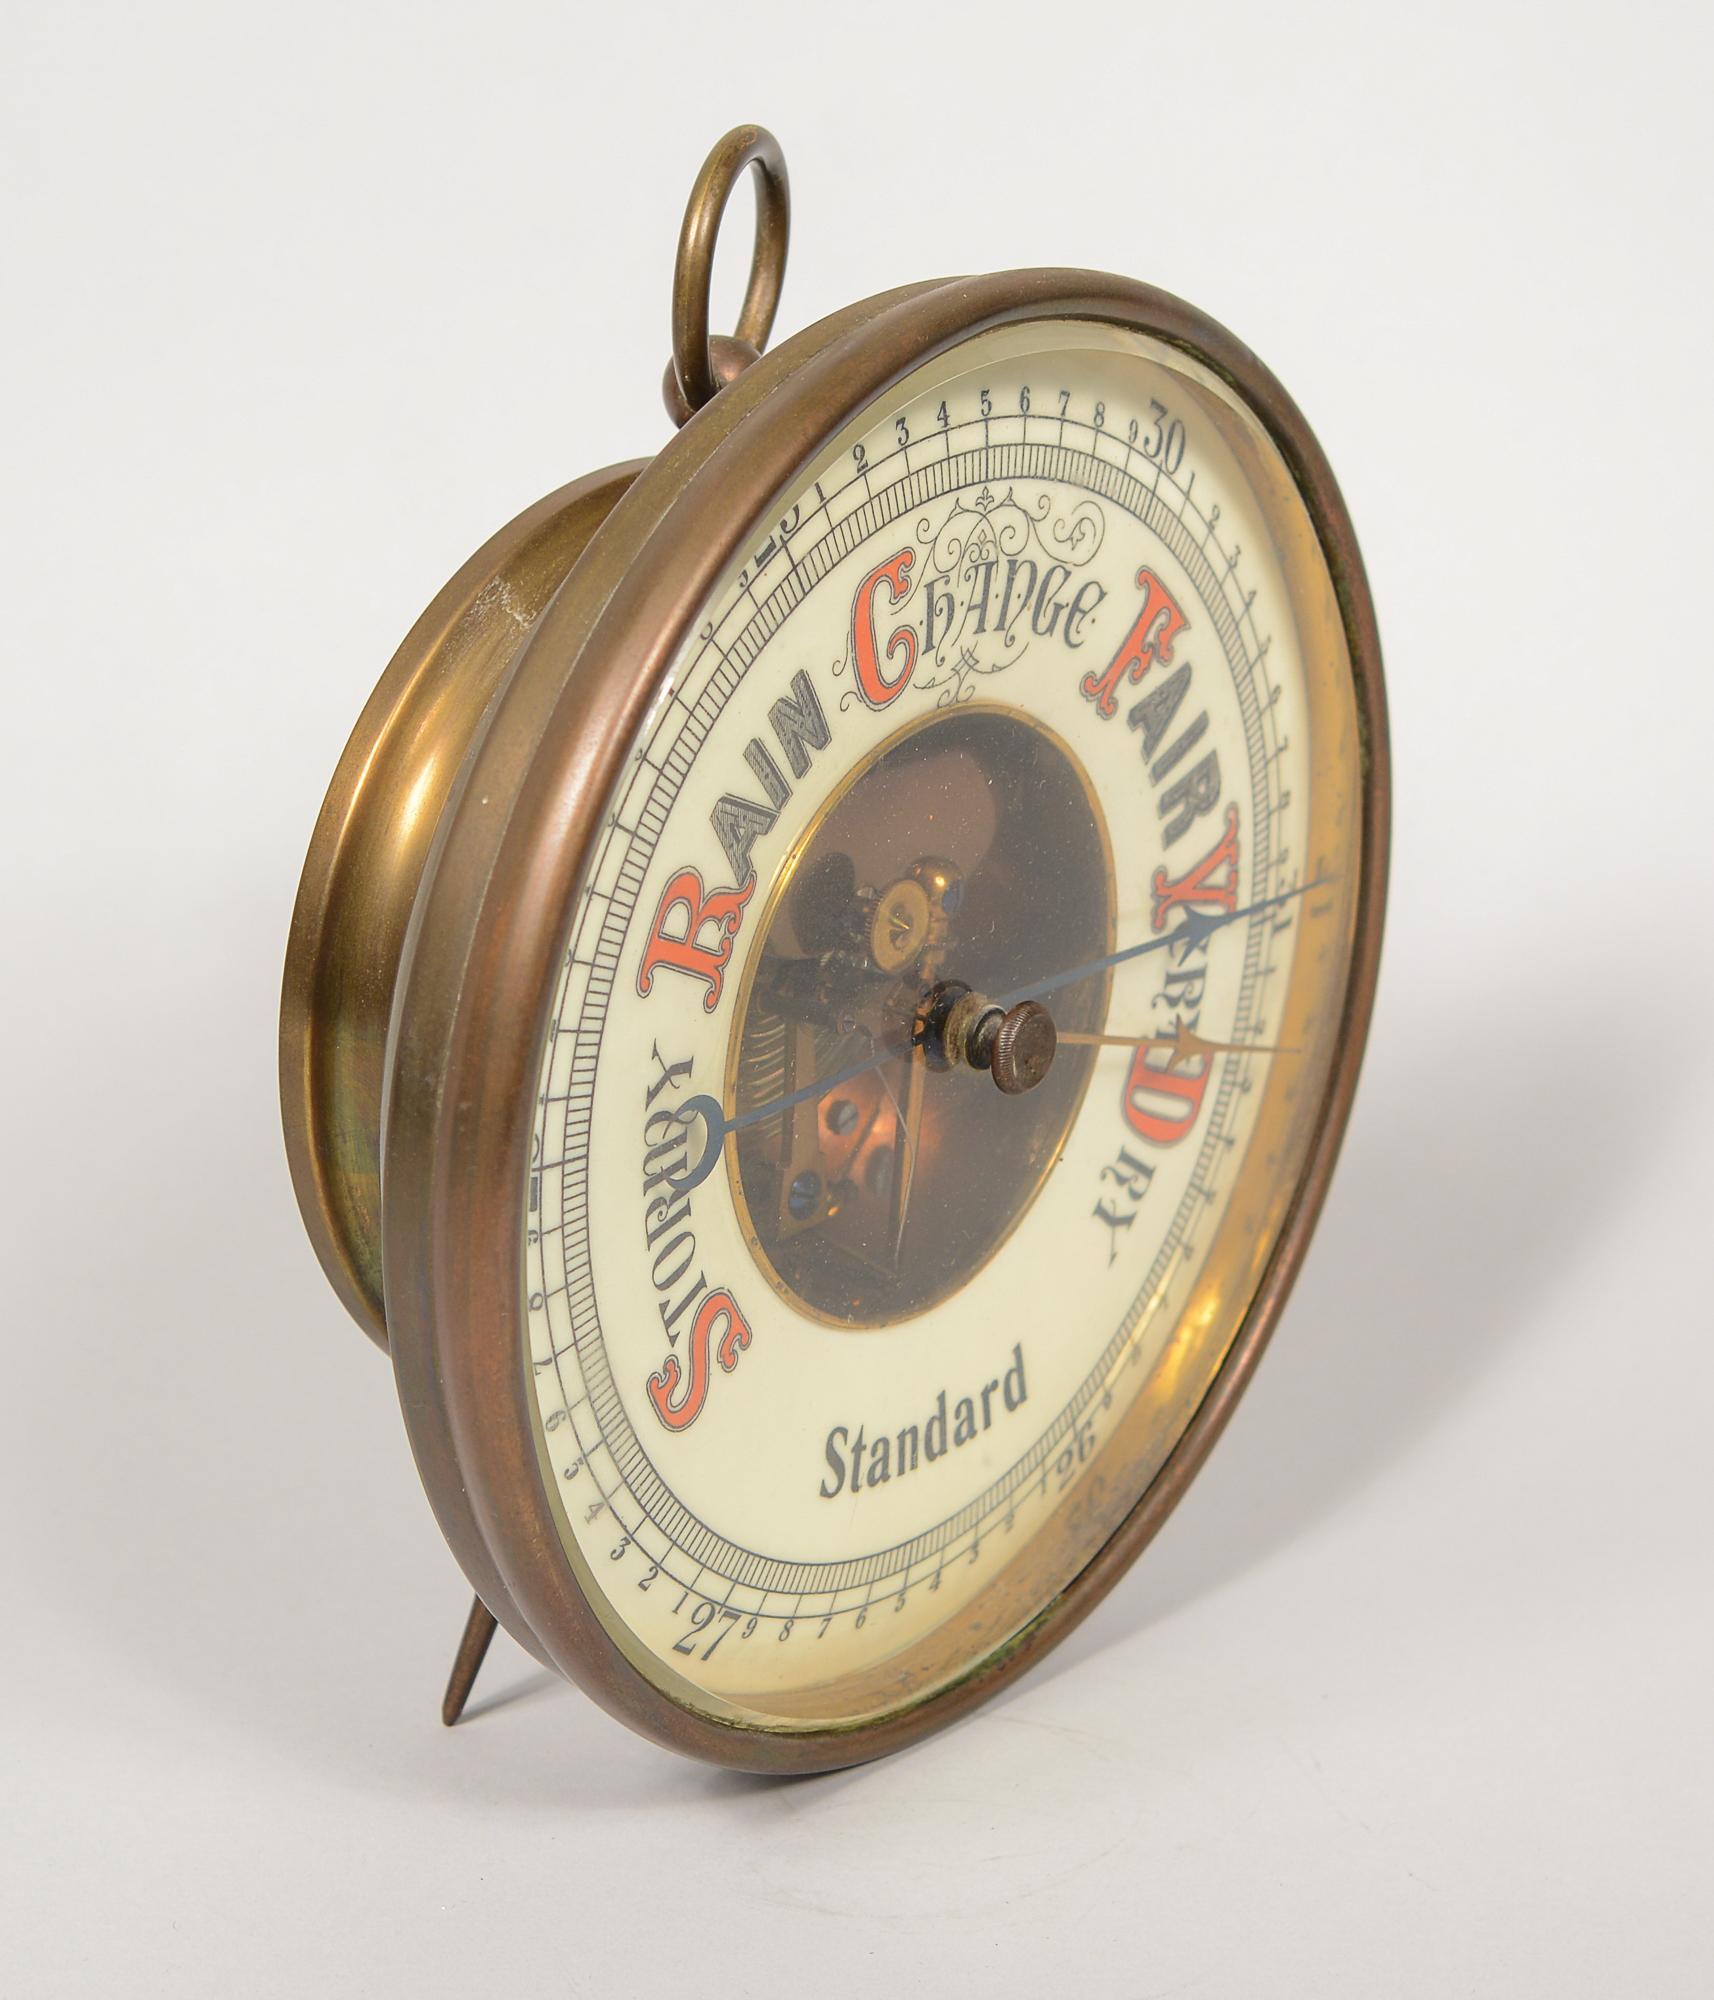 Early 20th century German aneroid barometer. This barometer has an enamelled face. The workings in the interior are of high quality. The barometer is large with an 8 inch diameter face. This can stand on a desk or table and can also be hung on a